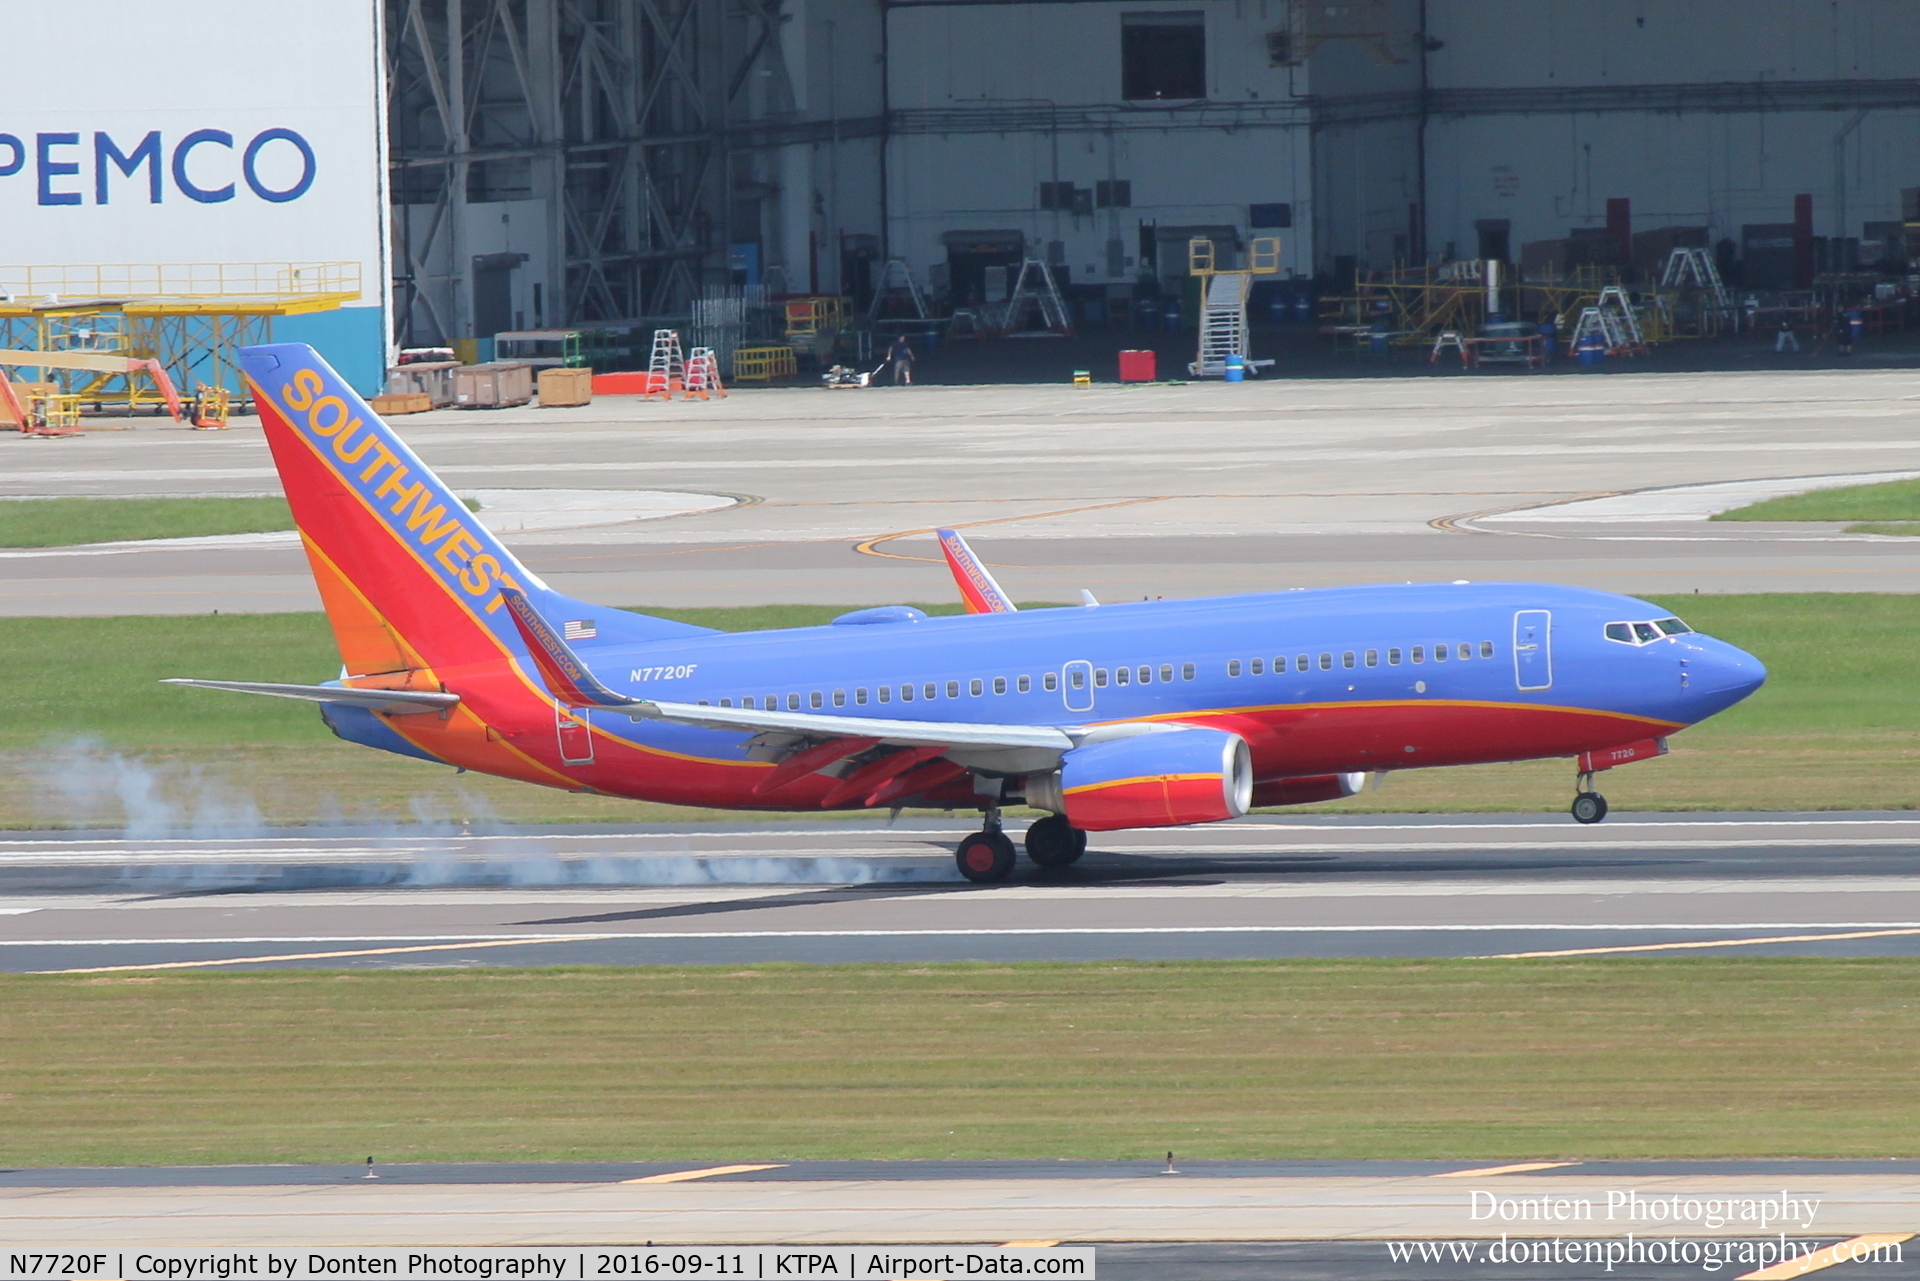 N7720F, 2006 Boeing 737-7BD C/N 33922, Southwest Flight 50 (N7720F) arrives at Tampa International Airport following flight from Reagan National Airport